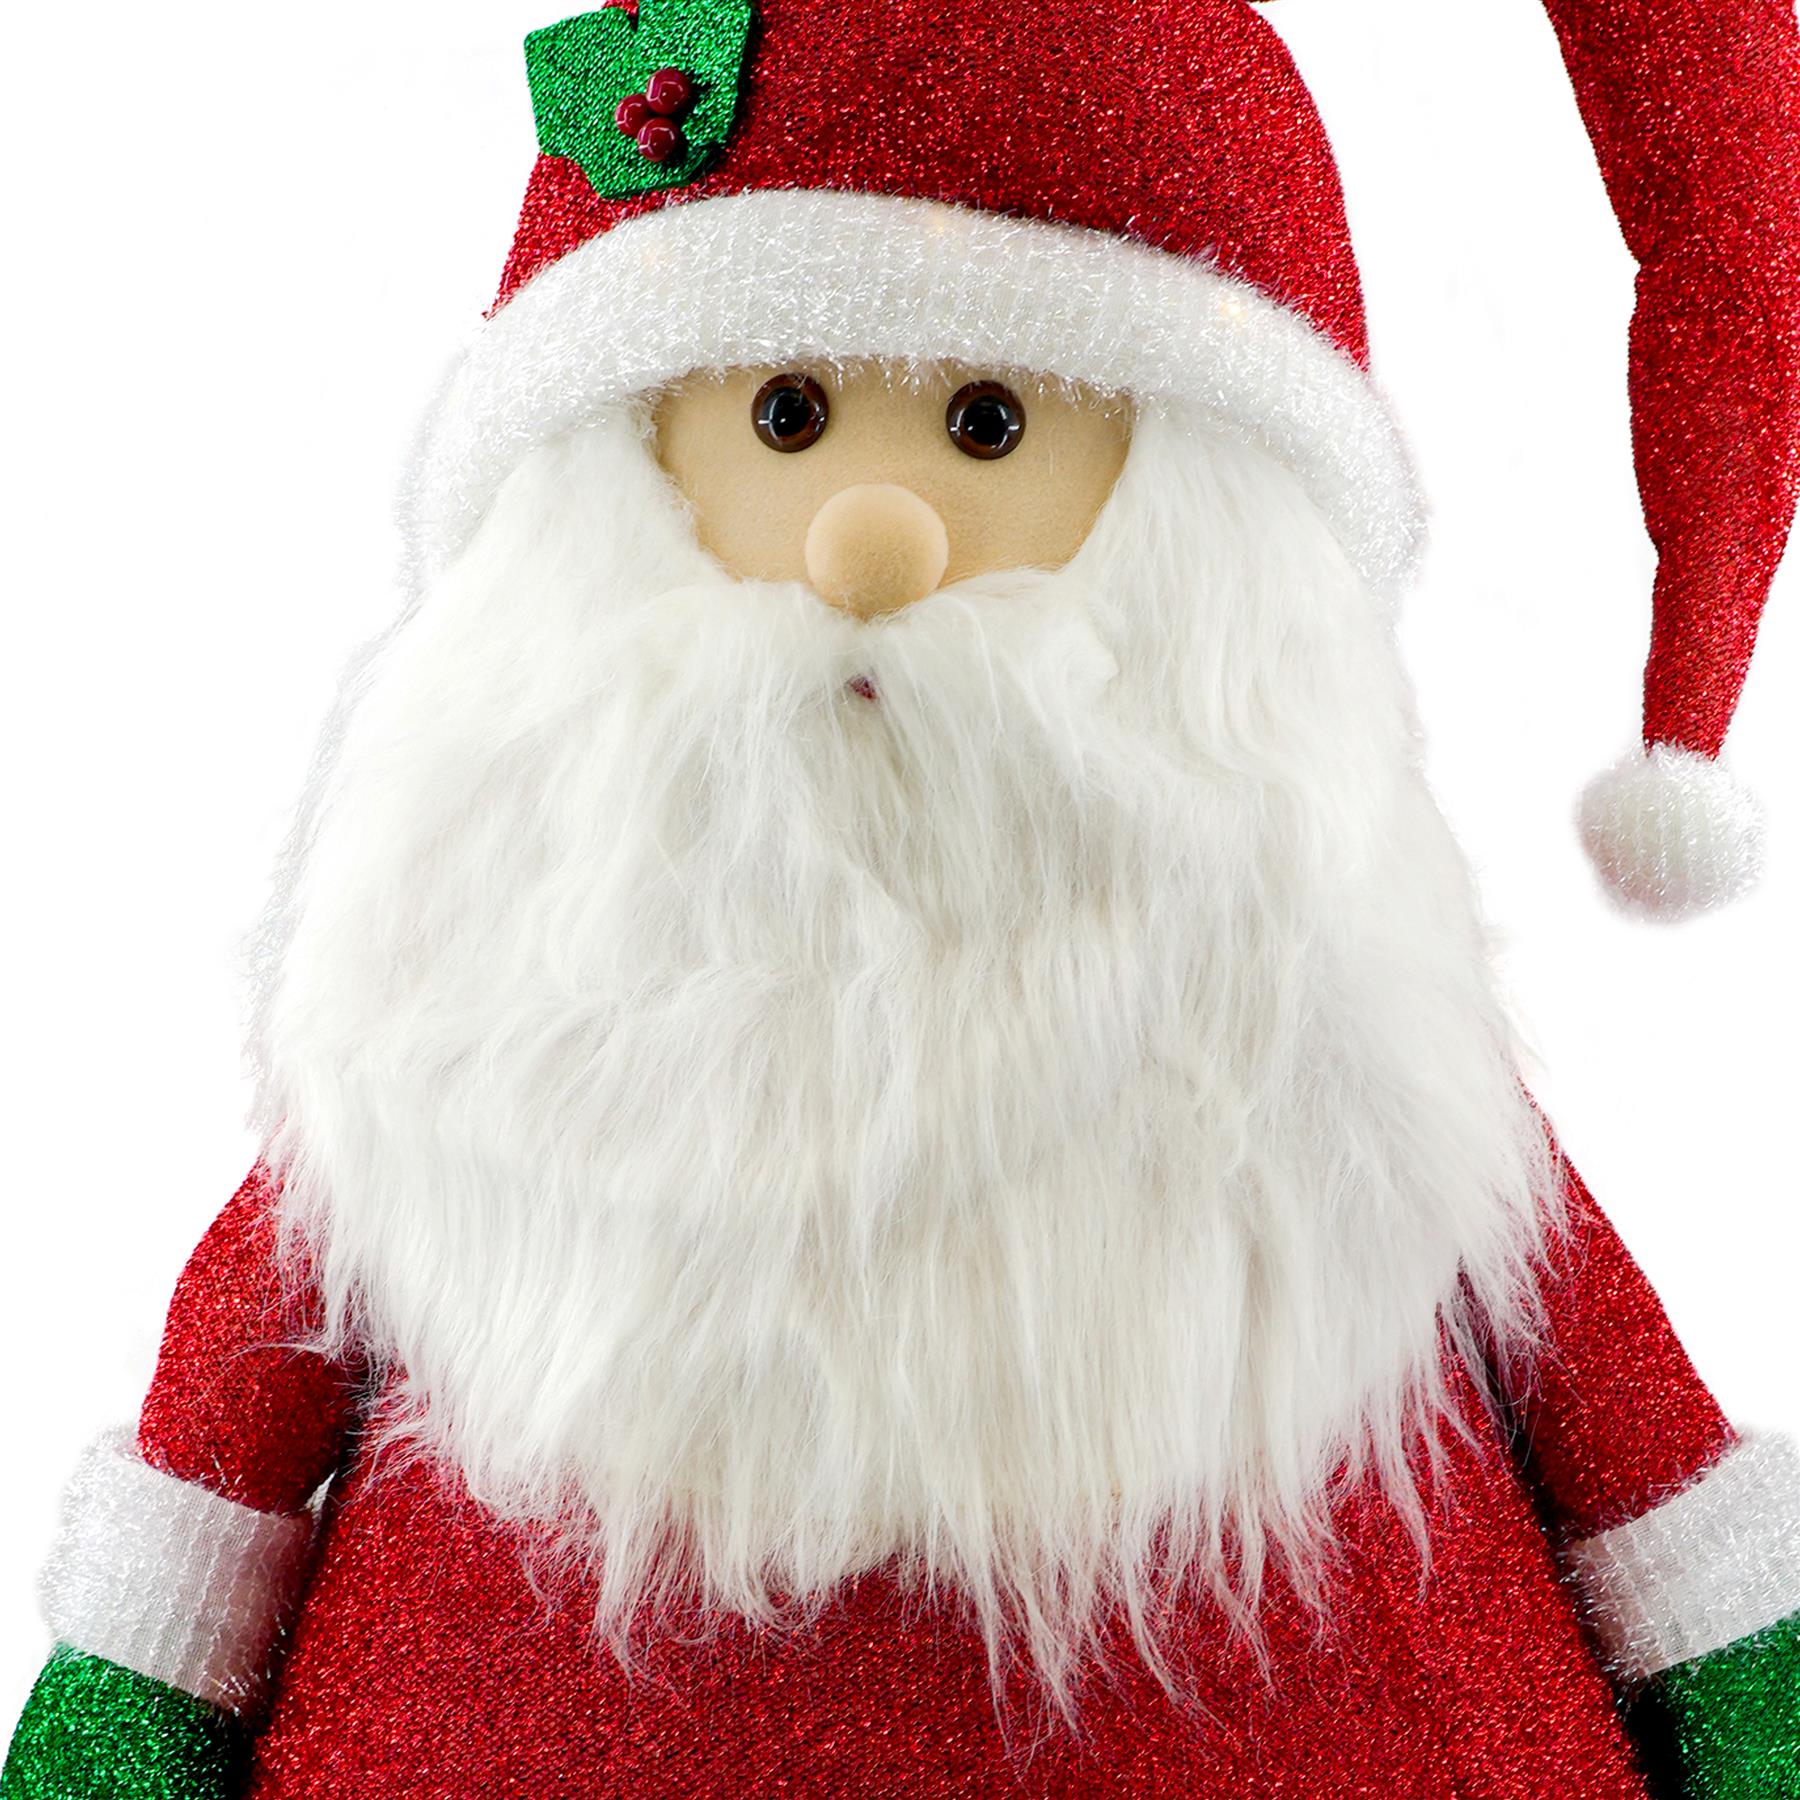 The Magic Toy Shop Christmas Decoration Collapsible Santa Christmas Decoration with LED lights